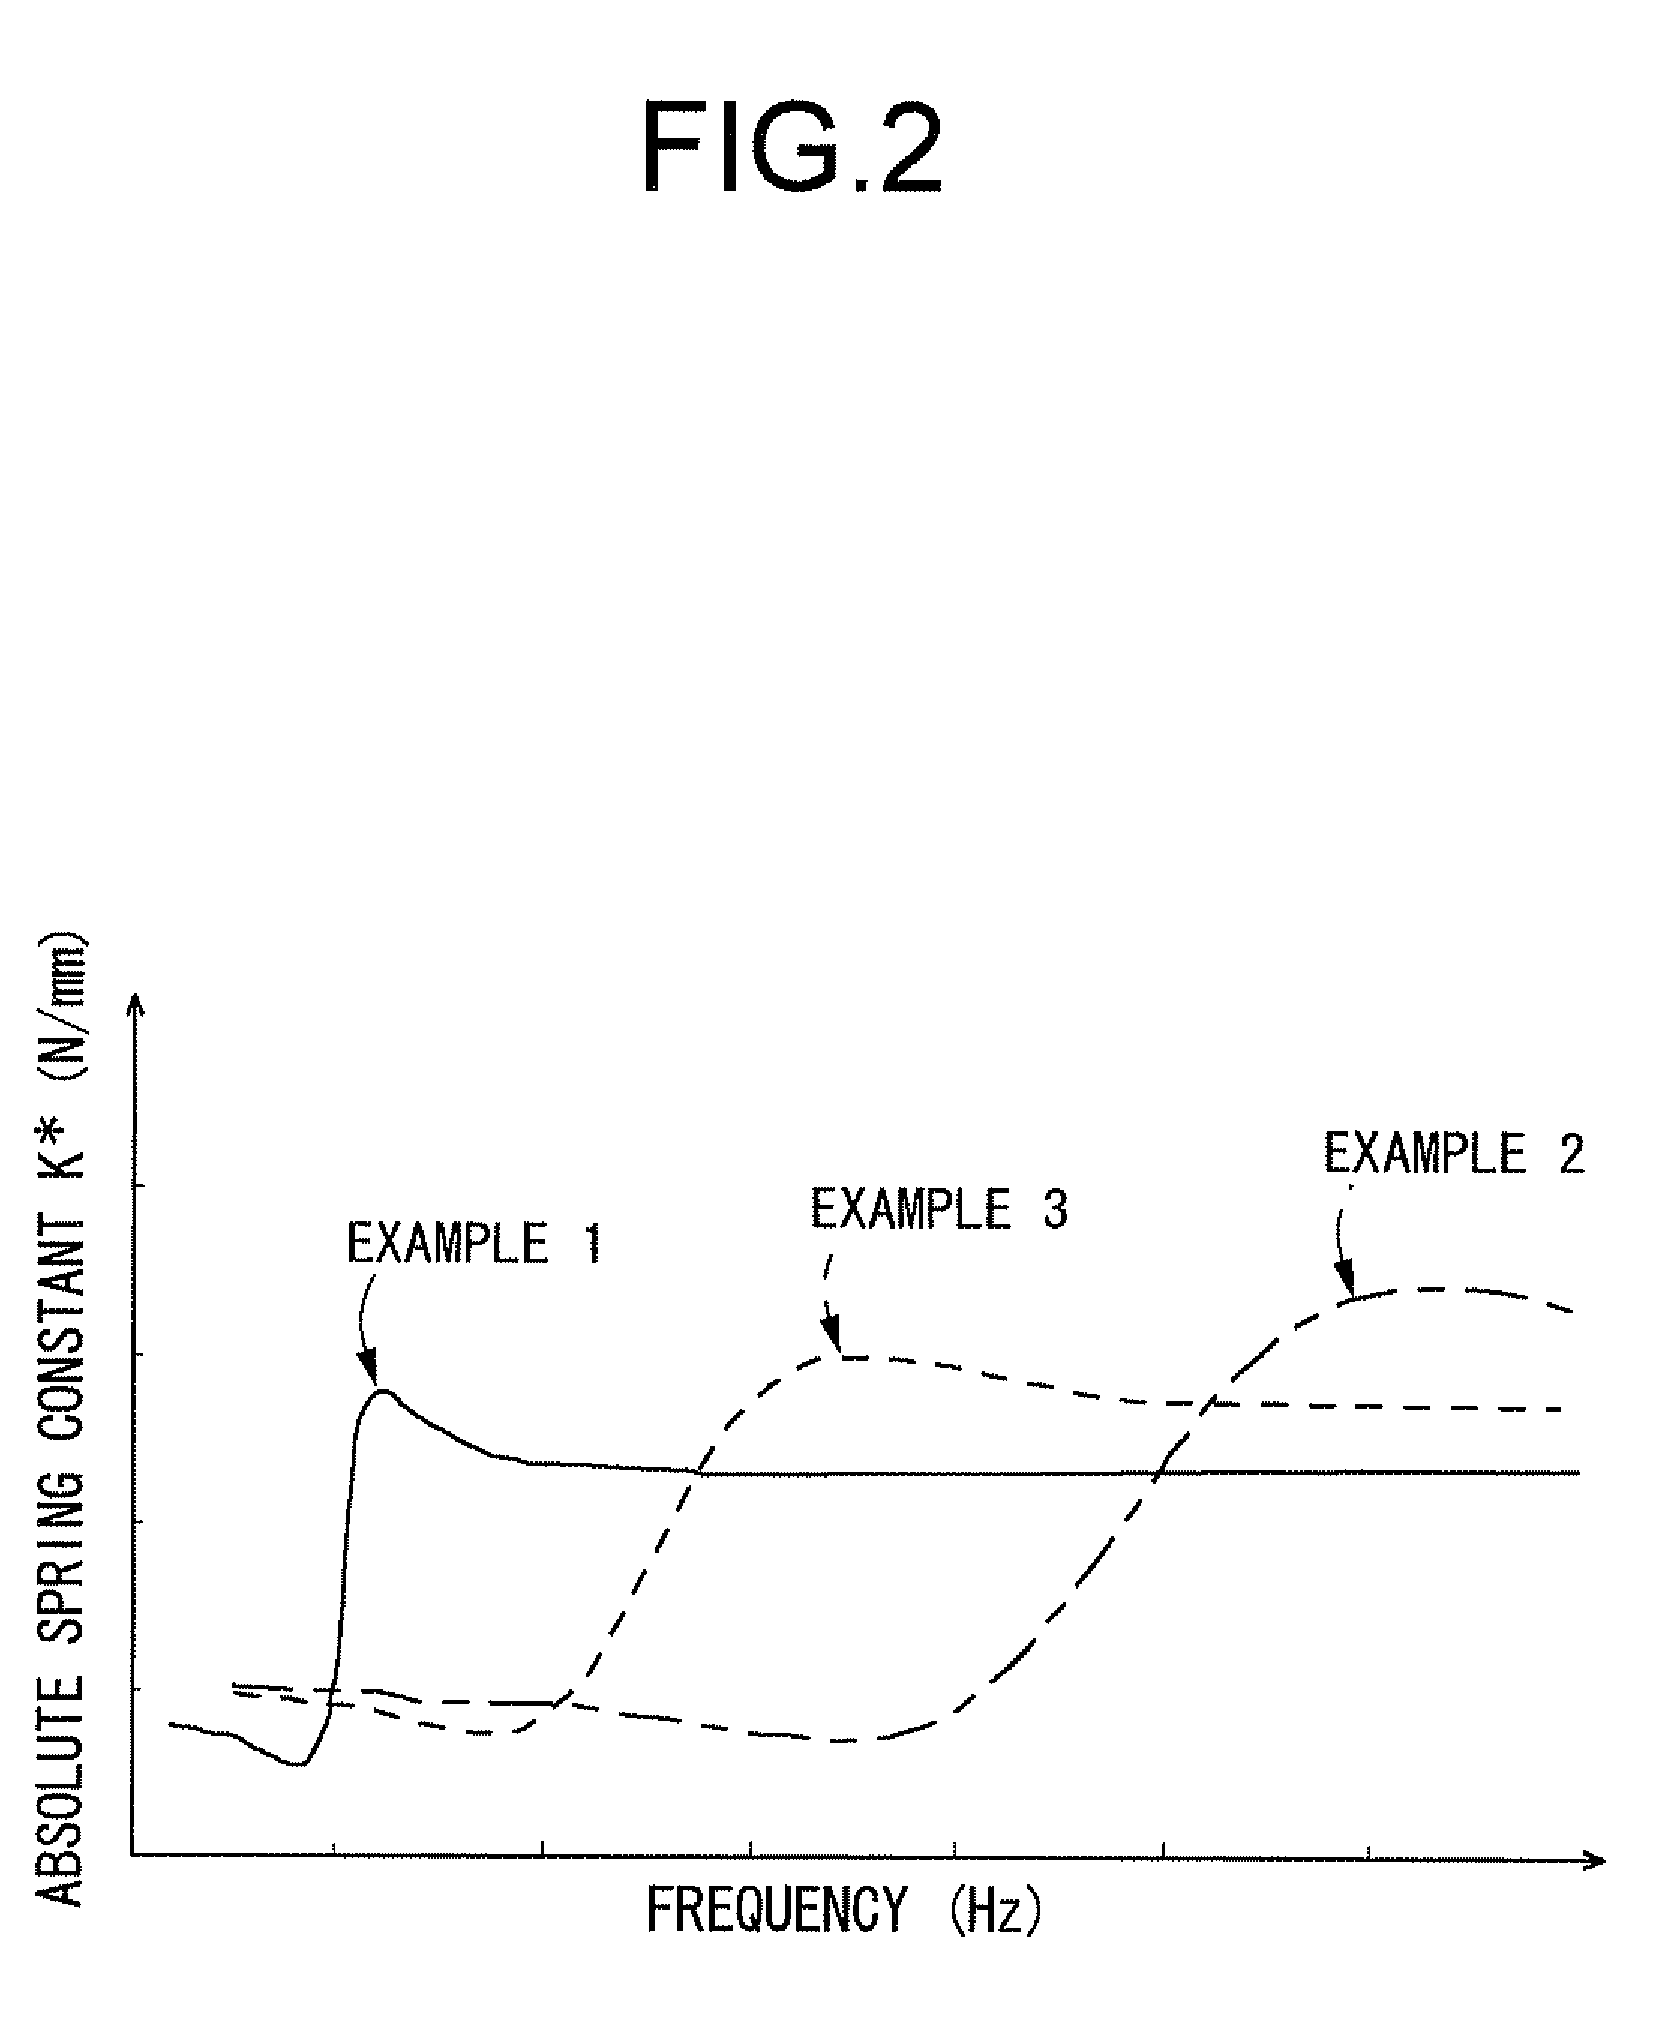 Fluid-filled type vibration damping device